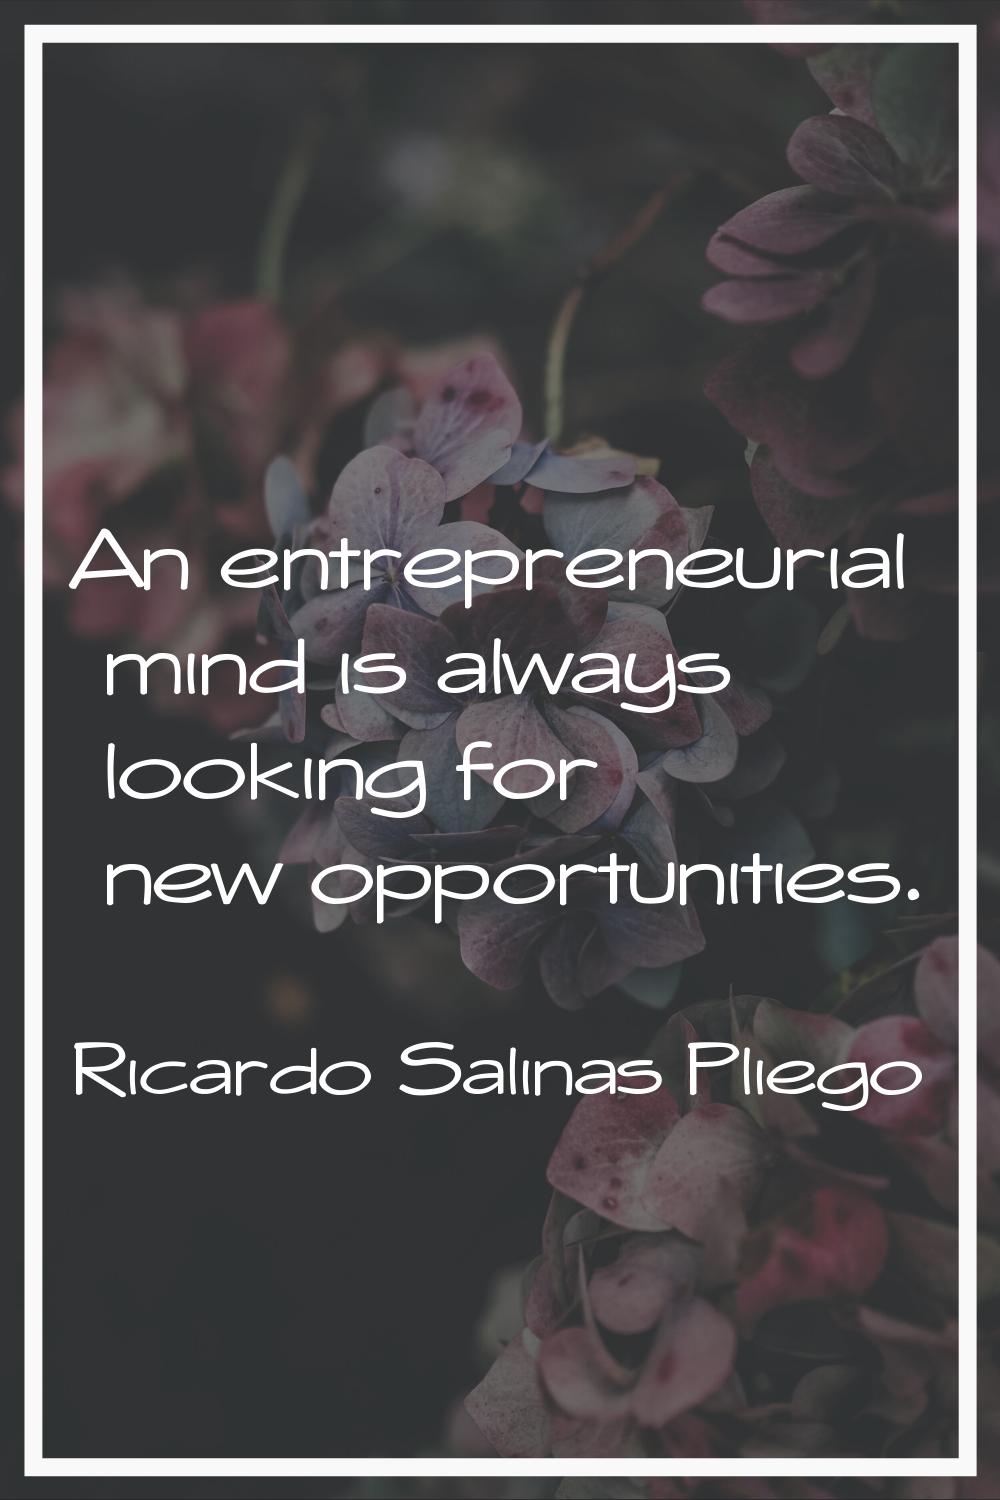 An entrepreneurial mind is always looking for new opportunities.